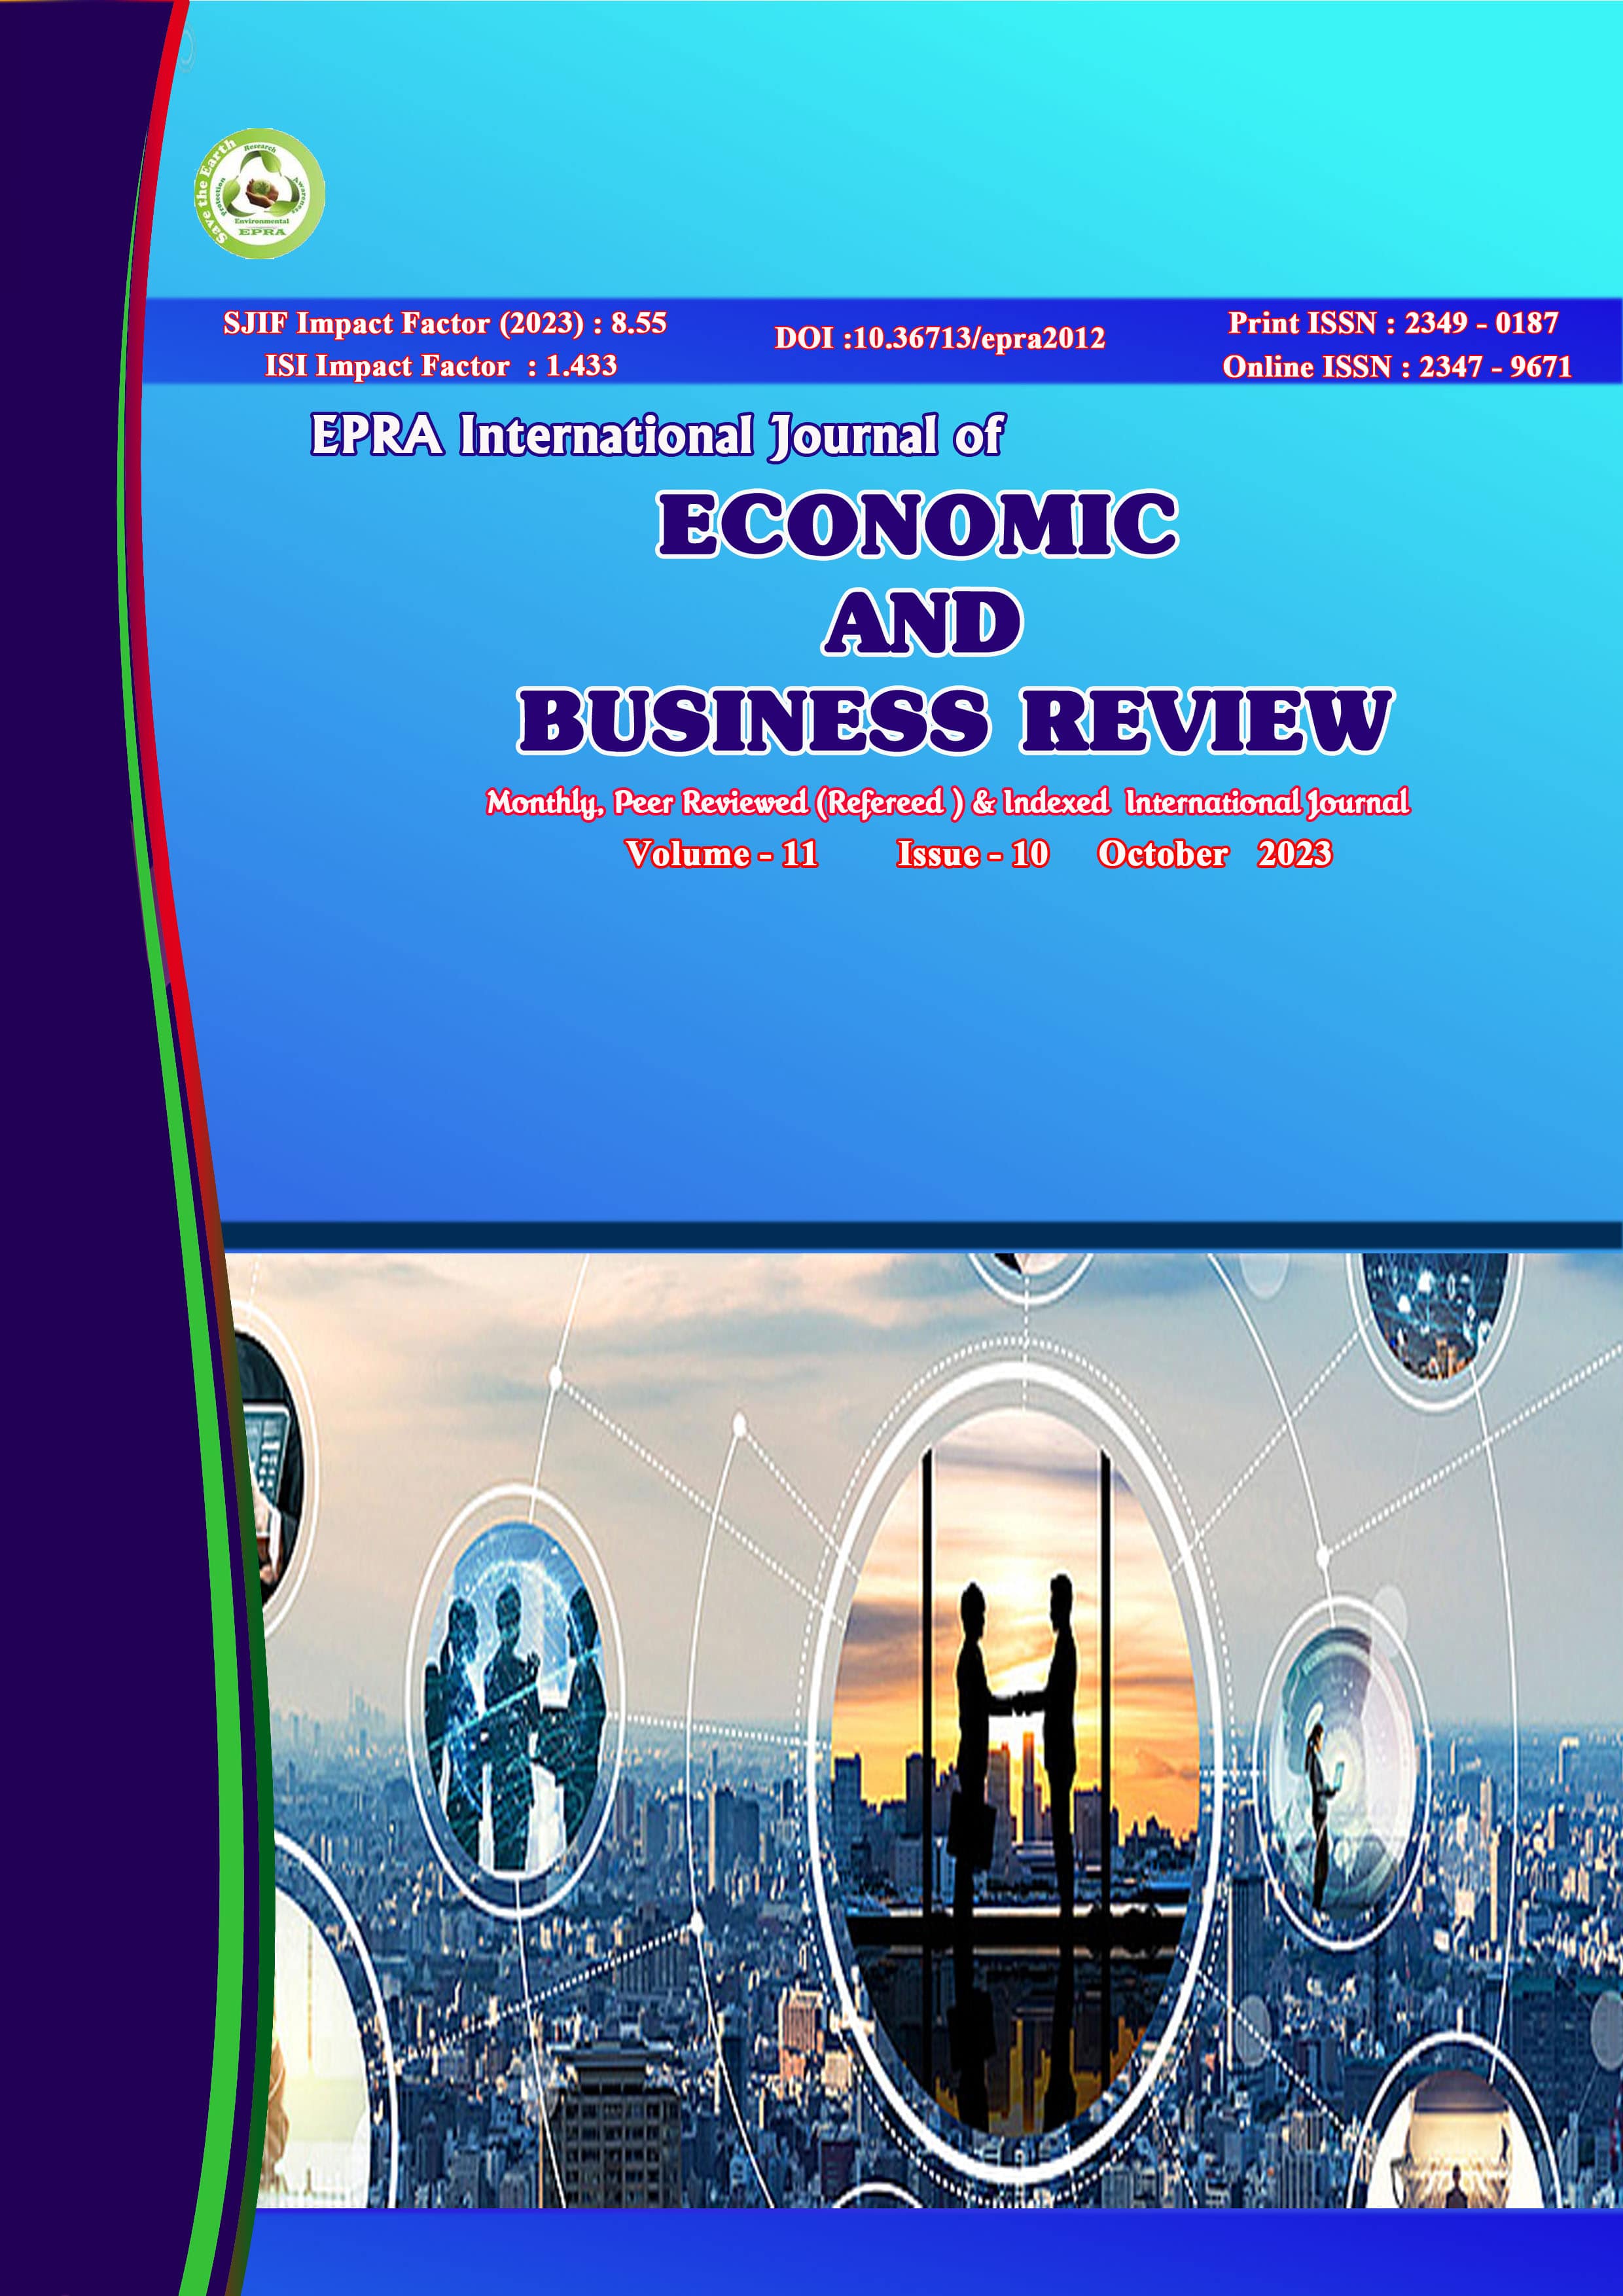 					View Vol. 11 No. 10 (2023): EPRA International Journal of Economic and Business Review(JEBR)
				